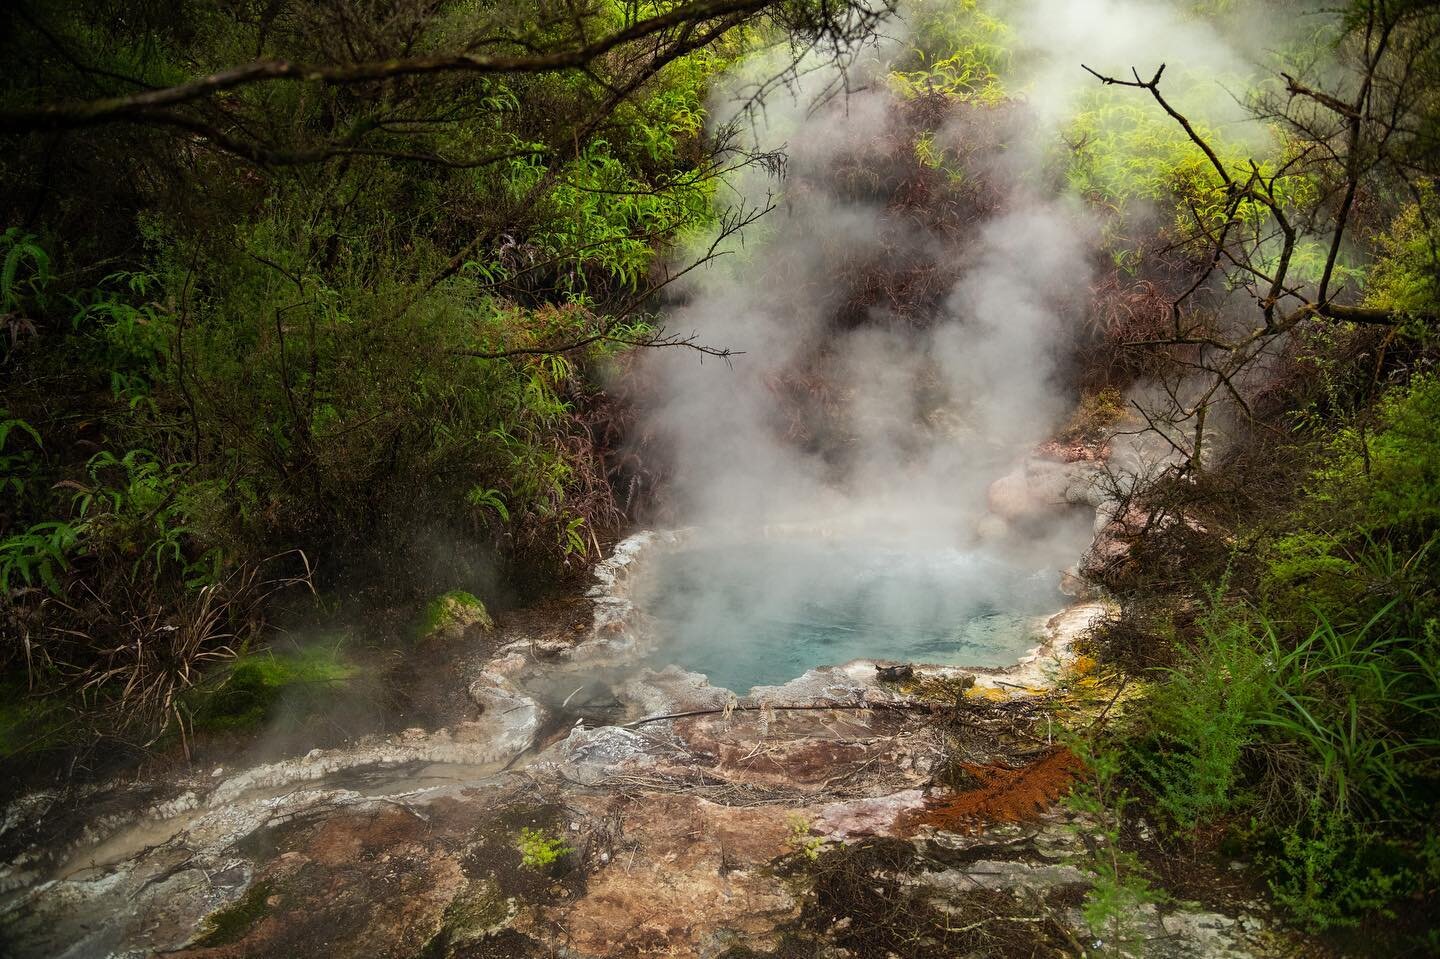 Geothermal. Fascinating to explore the many geothermal parks in New Zealand, home to geysers, steam vents, boiling pools and silica terraces exploding with vibrant colors. The colors are a result of the mineral-rich waters, algae and bacteria that th